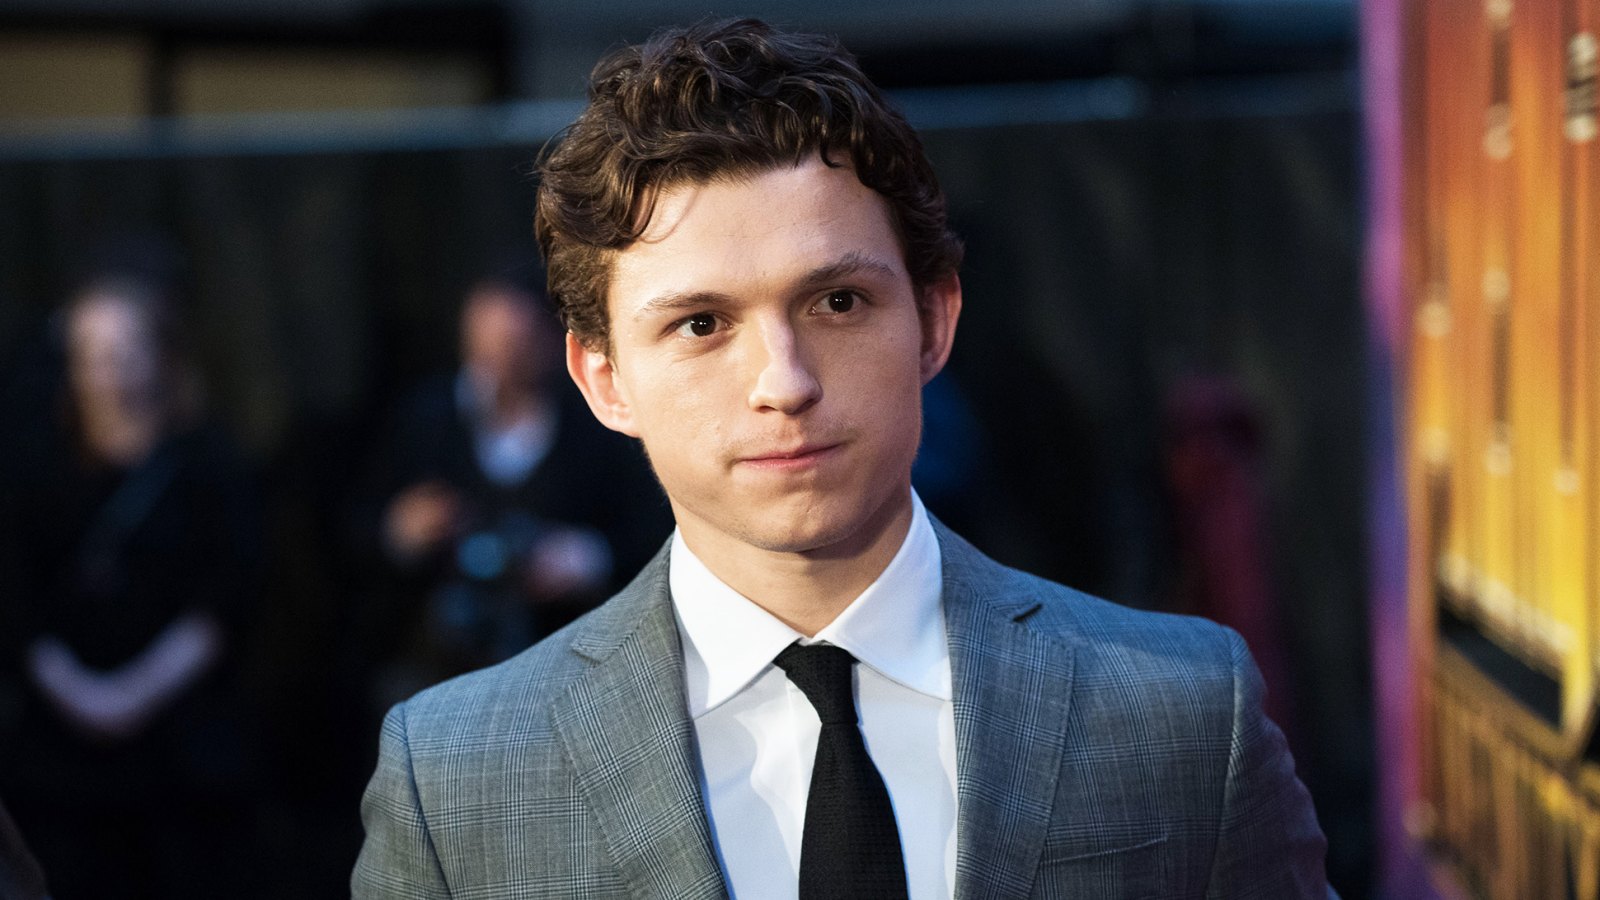 Tom Holland Tried Pumpkin for the First Time and Loved It: ‘That’s So Good’